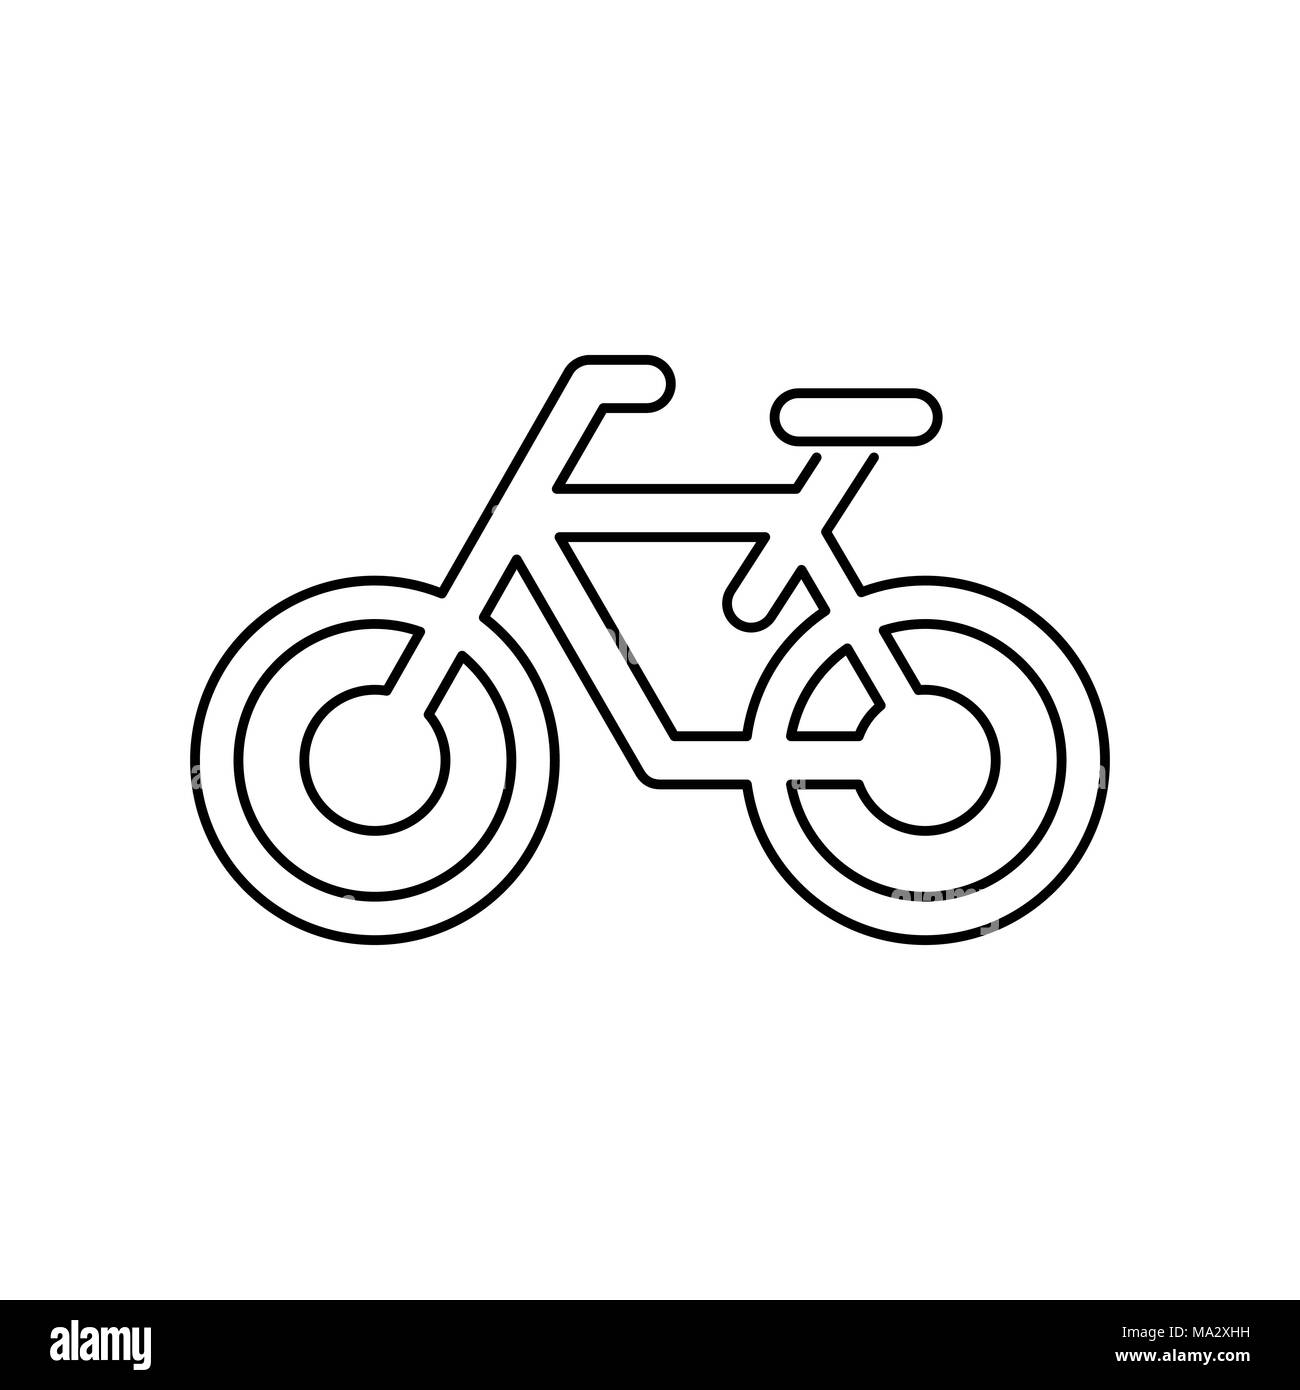 Bicycle icon simple flat vector illustration. Stock Vector